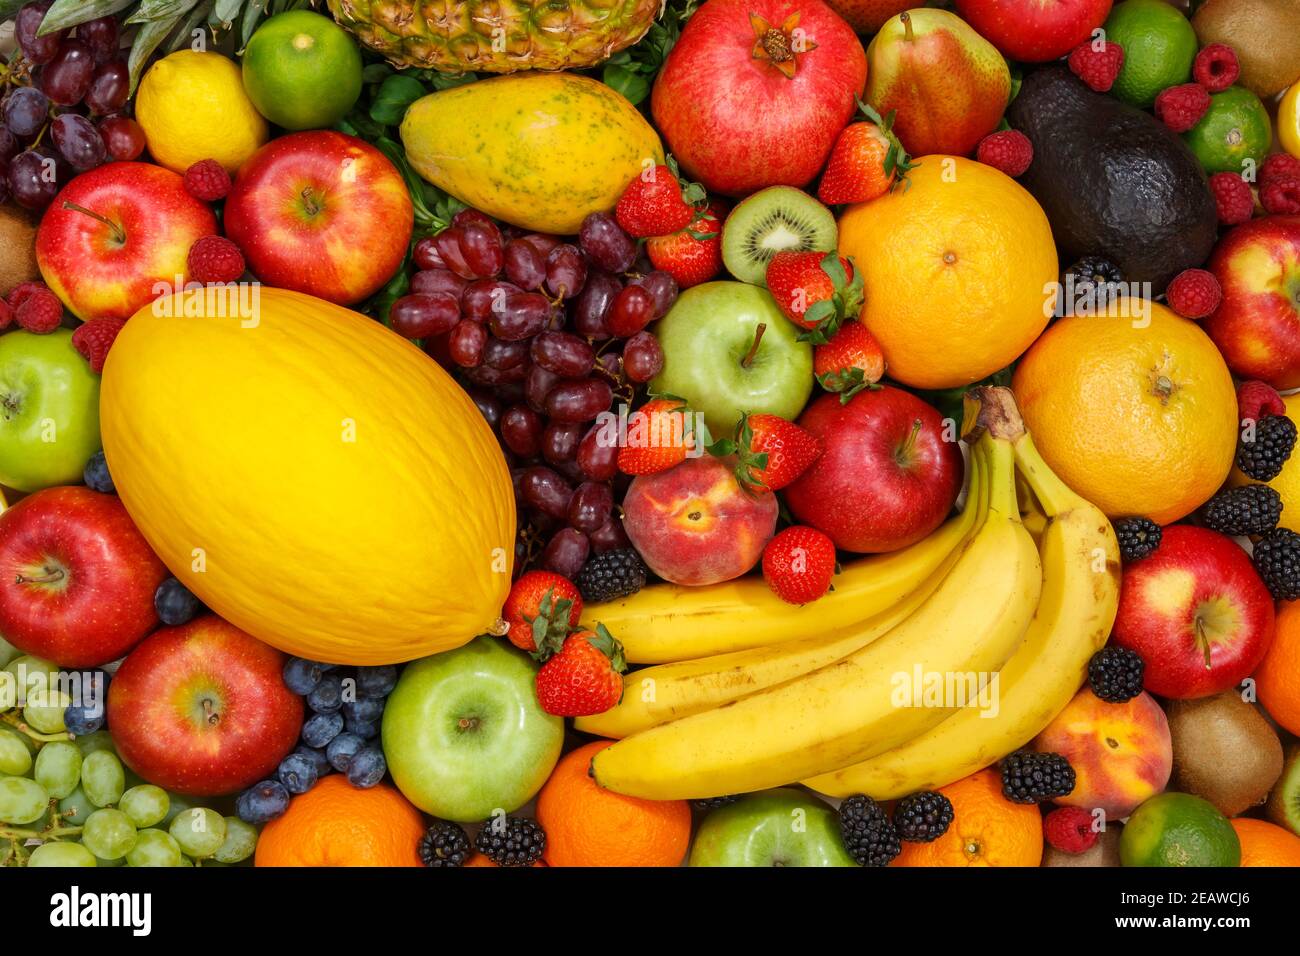 Food Background Fruits Collection Apples Berries Banana Oranges Fruit